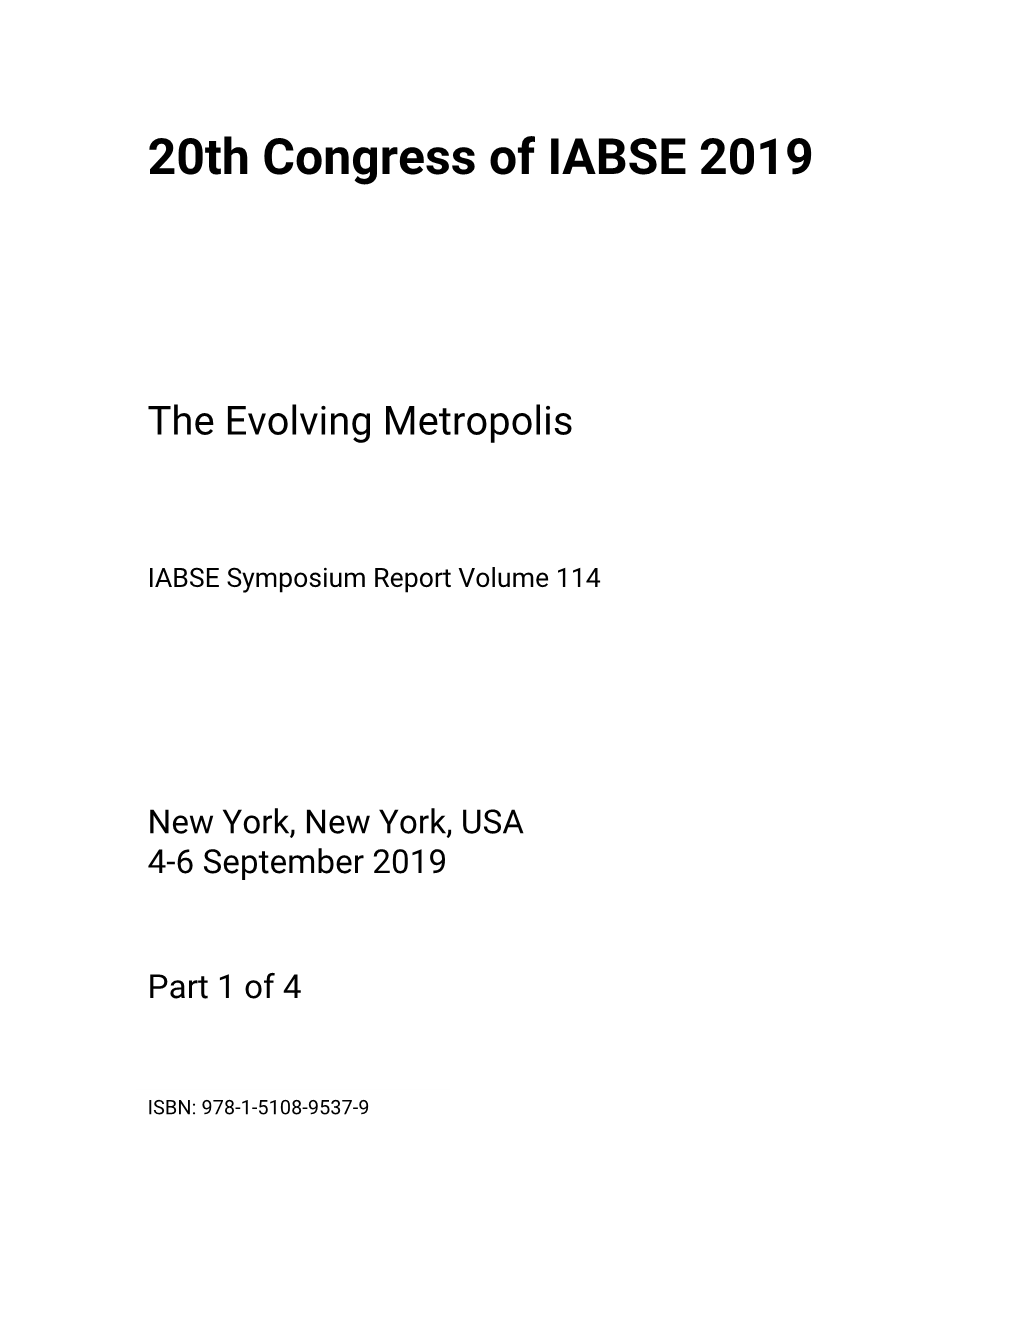 20Th Congress of IABSE 2019